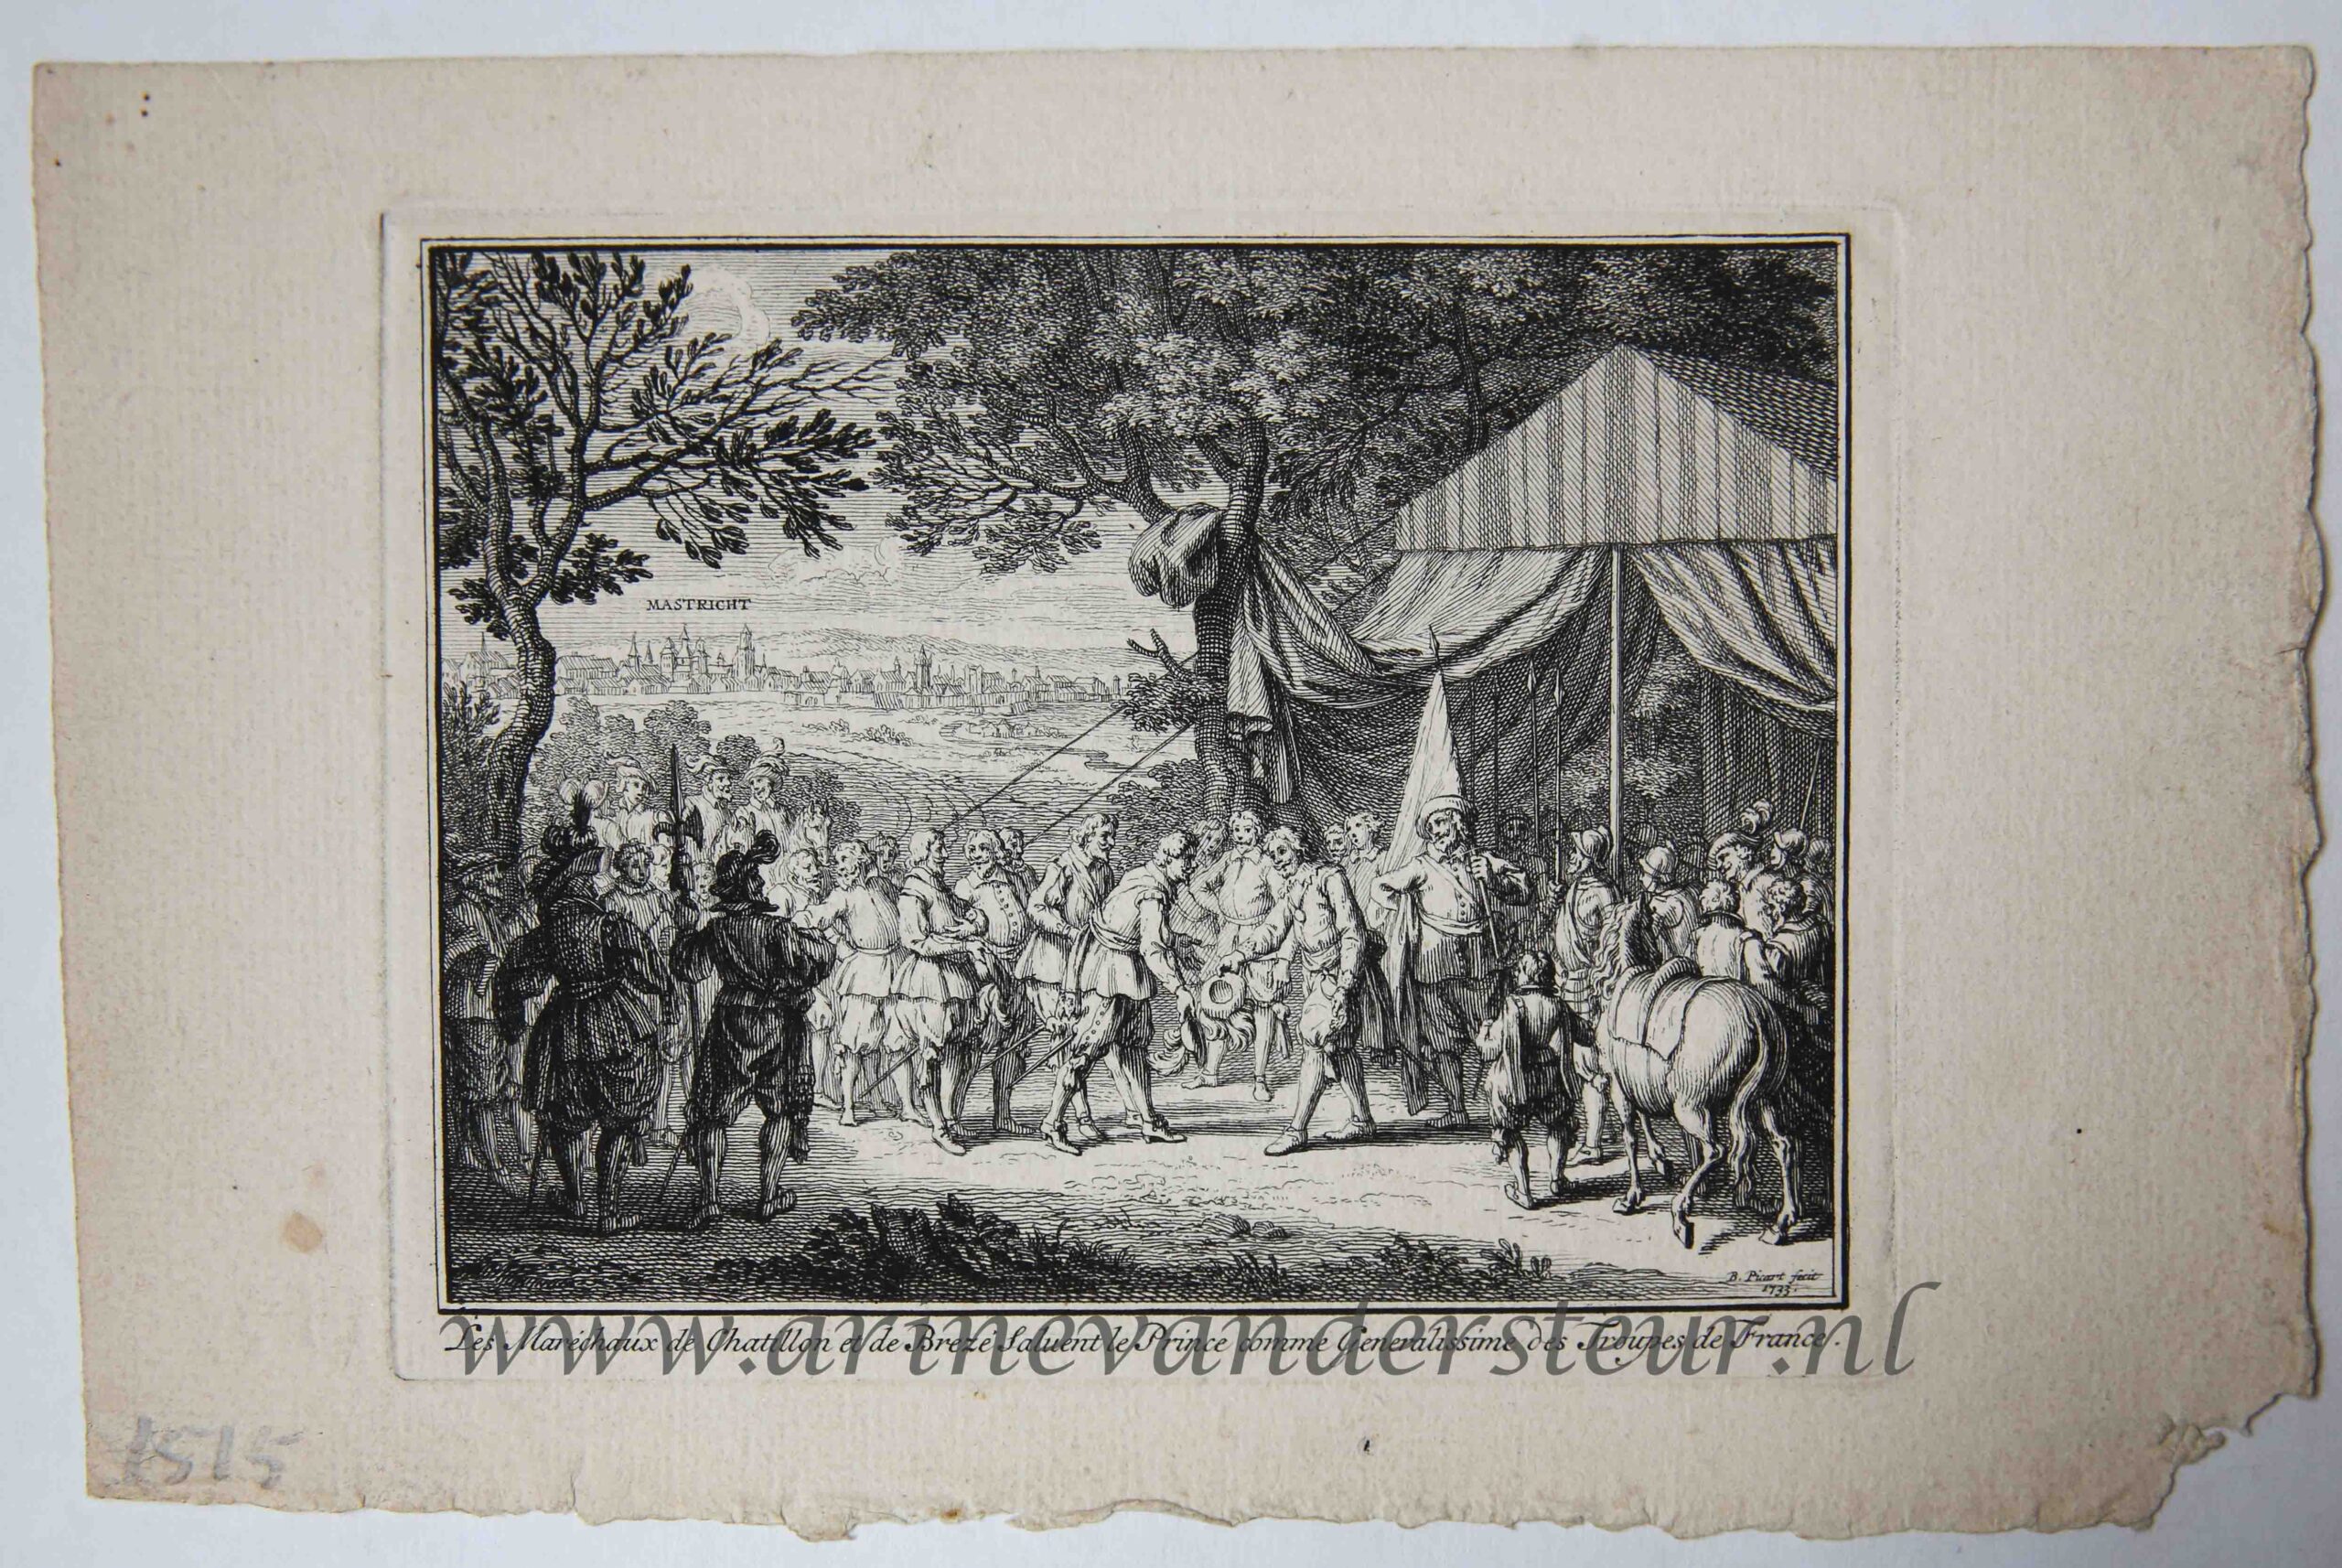 [Antique print, etching] Frederik Hendrik greeted by de Chatillon during the siege of Maastricht in 1632, published 1733, 1 p.